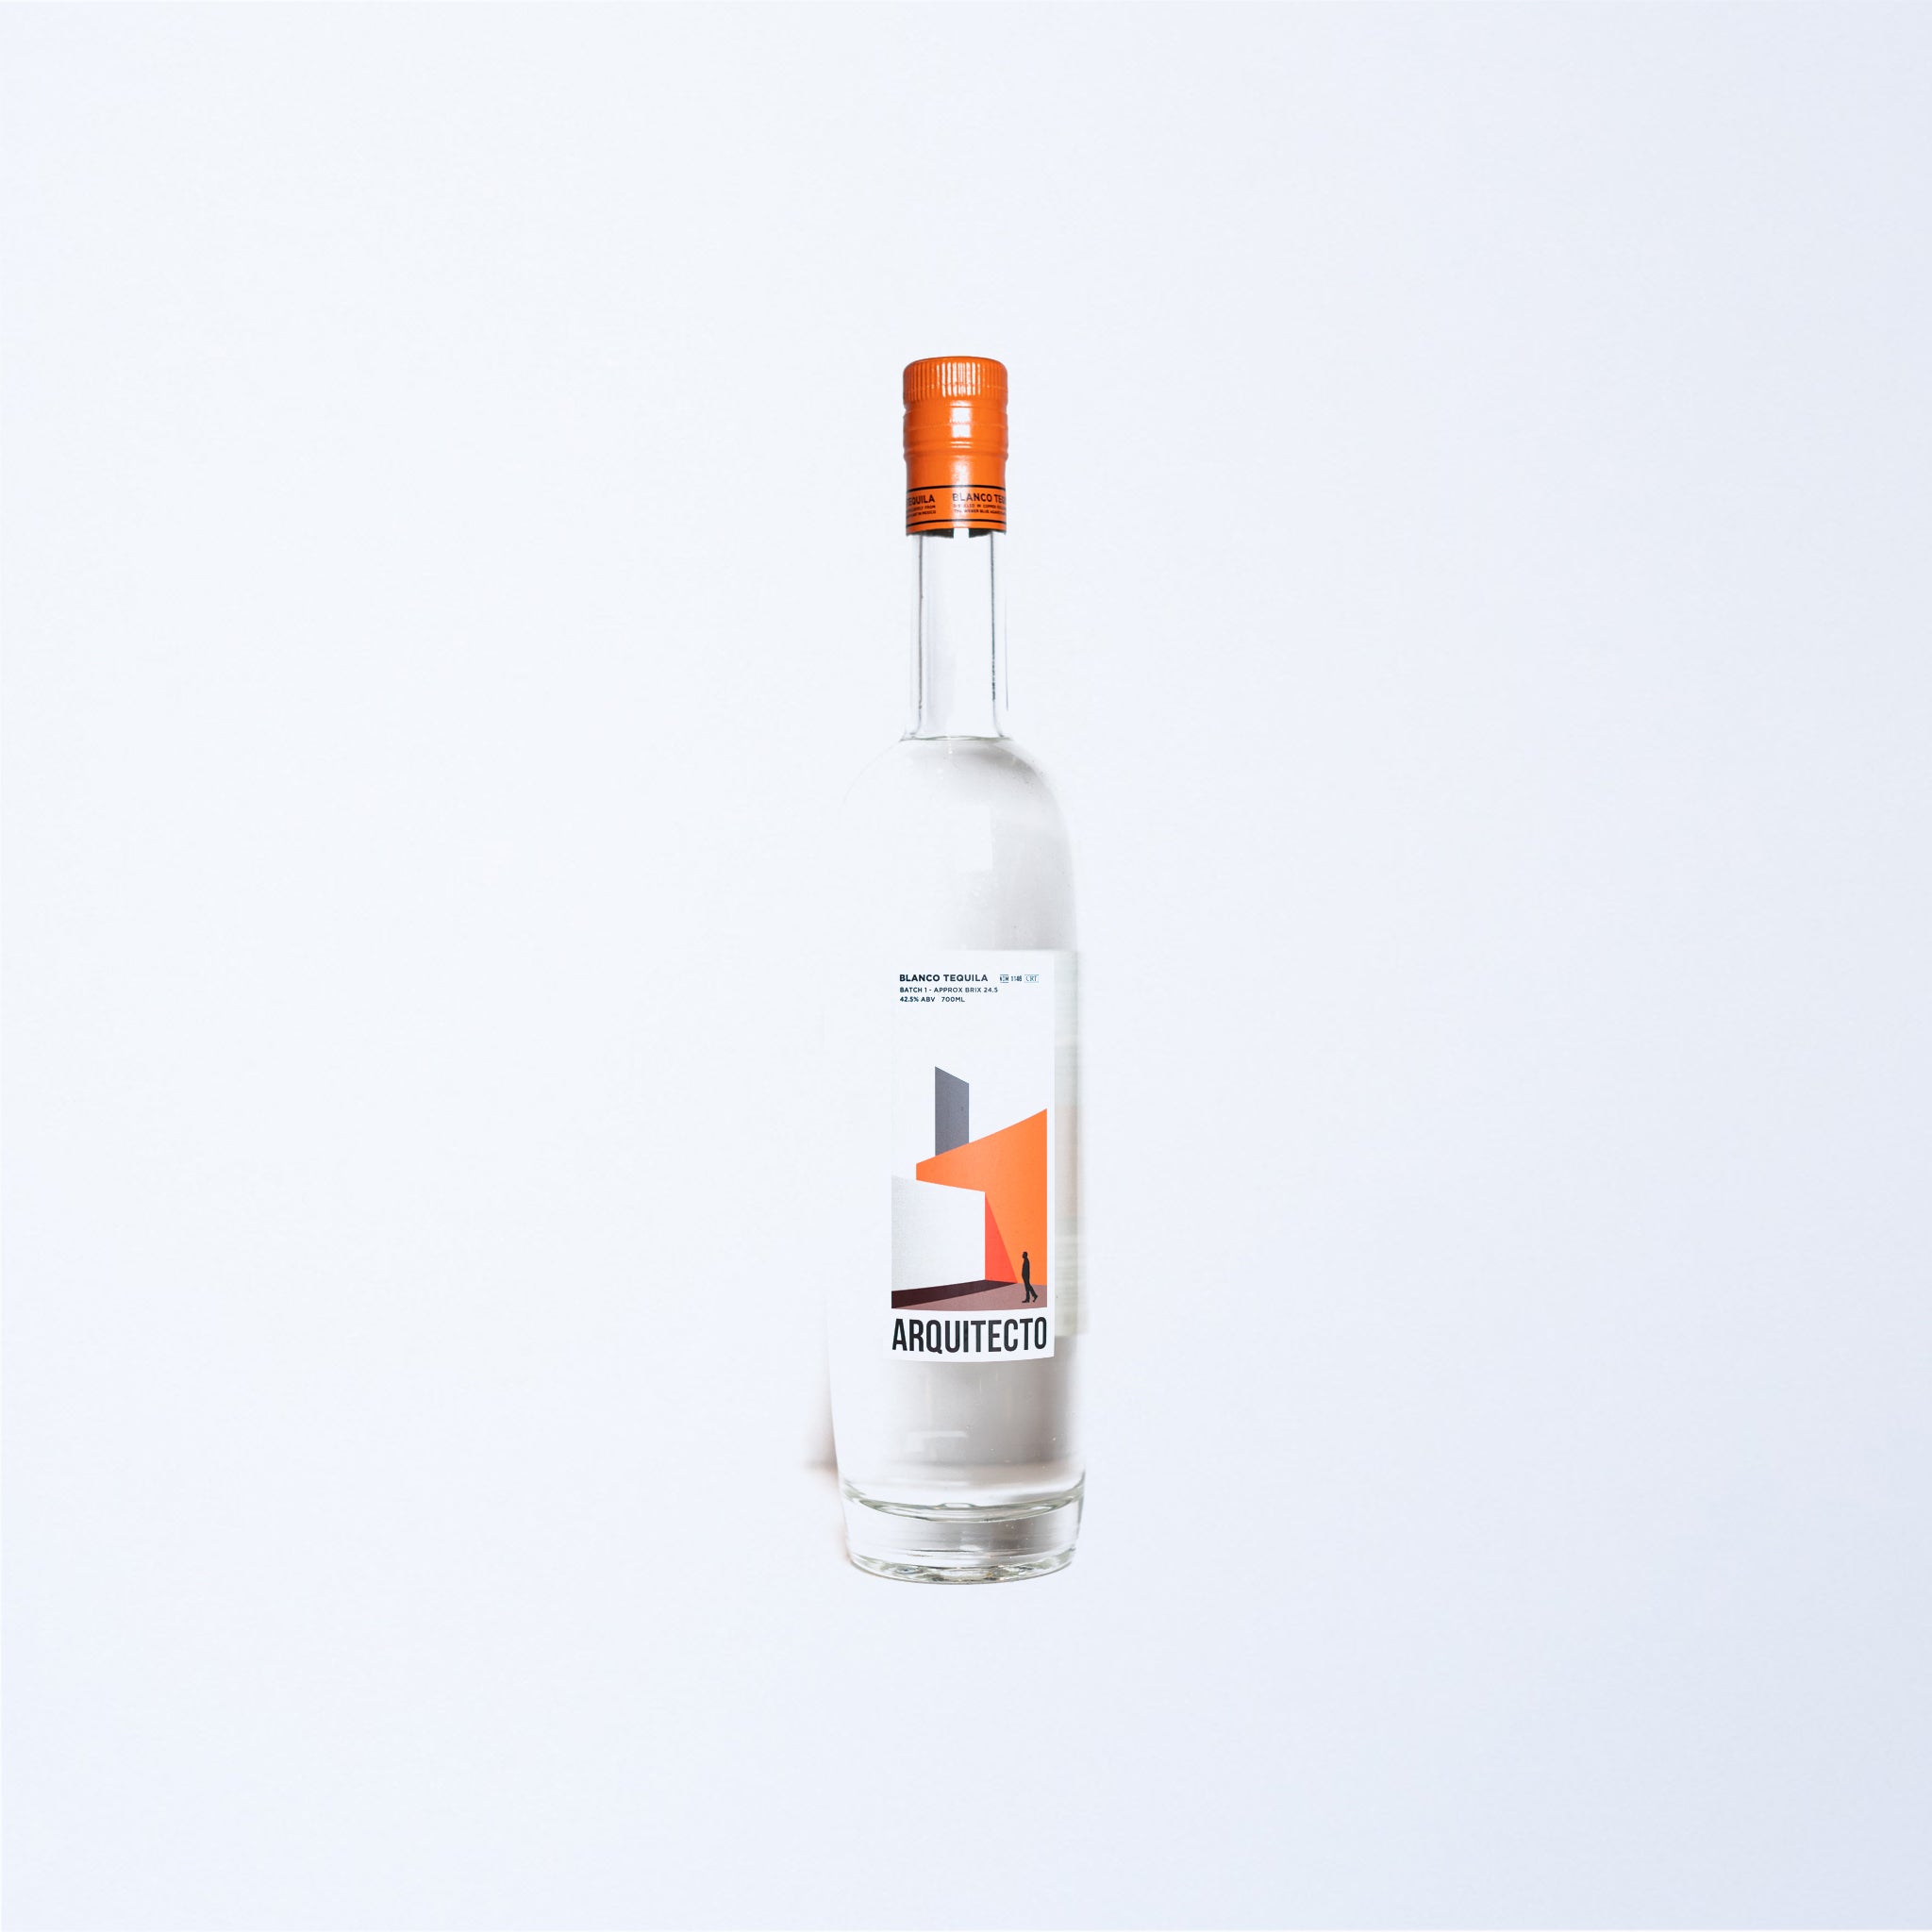 a 700ml bottle of Arquitecto Blanco Tequila.